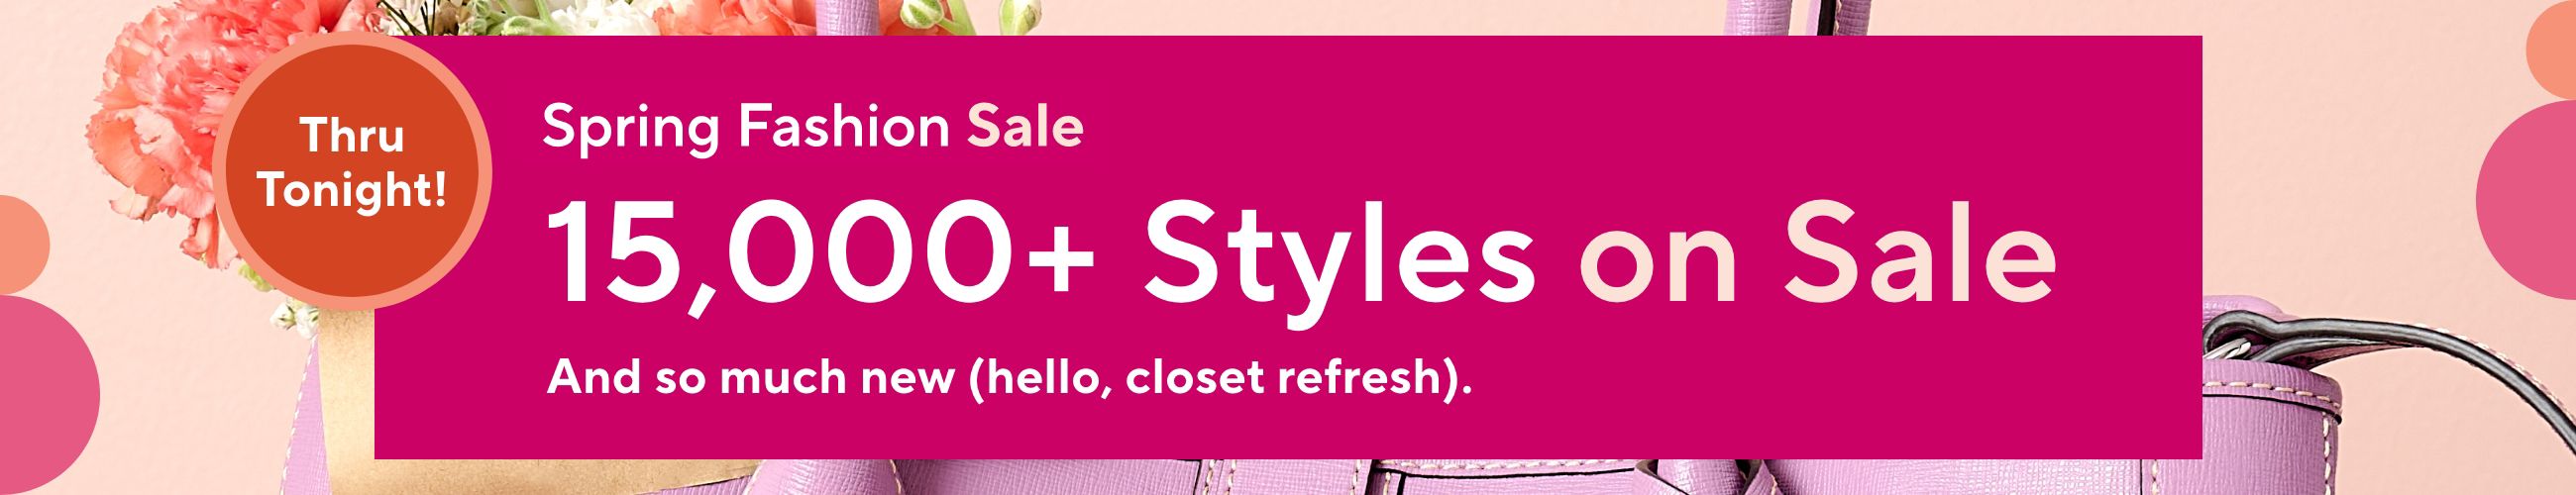 Thru Tonight! Spring Fashion Sale - 15,000+ Styles on Sale - And so much new (hello, closet refresh).